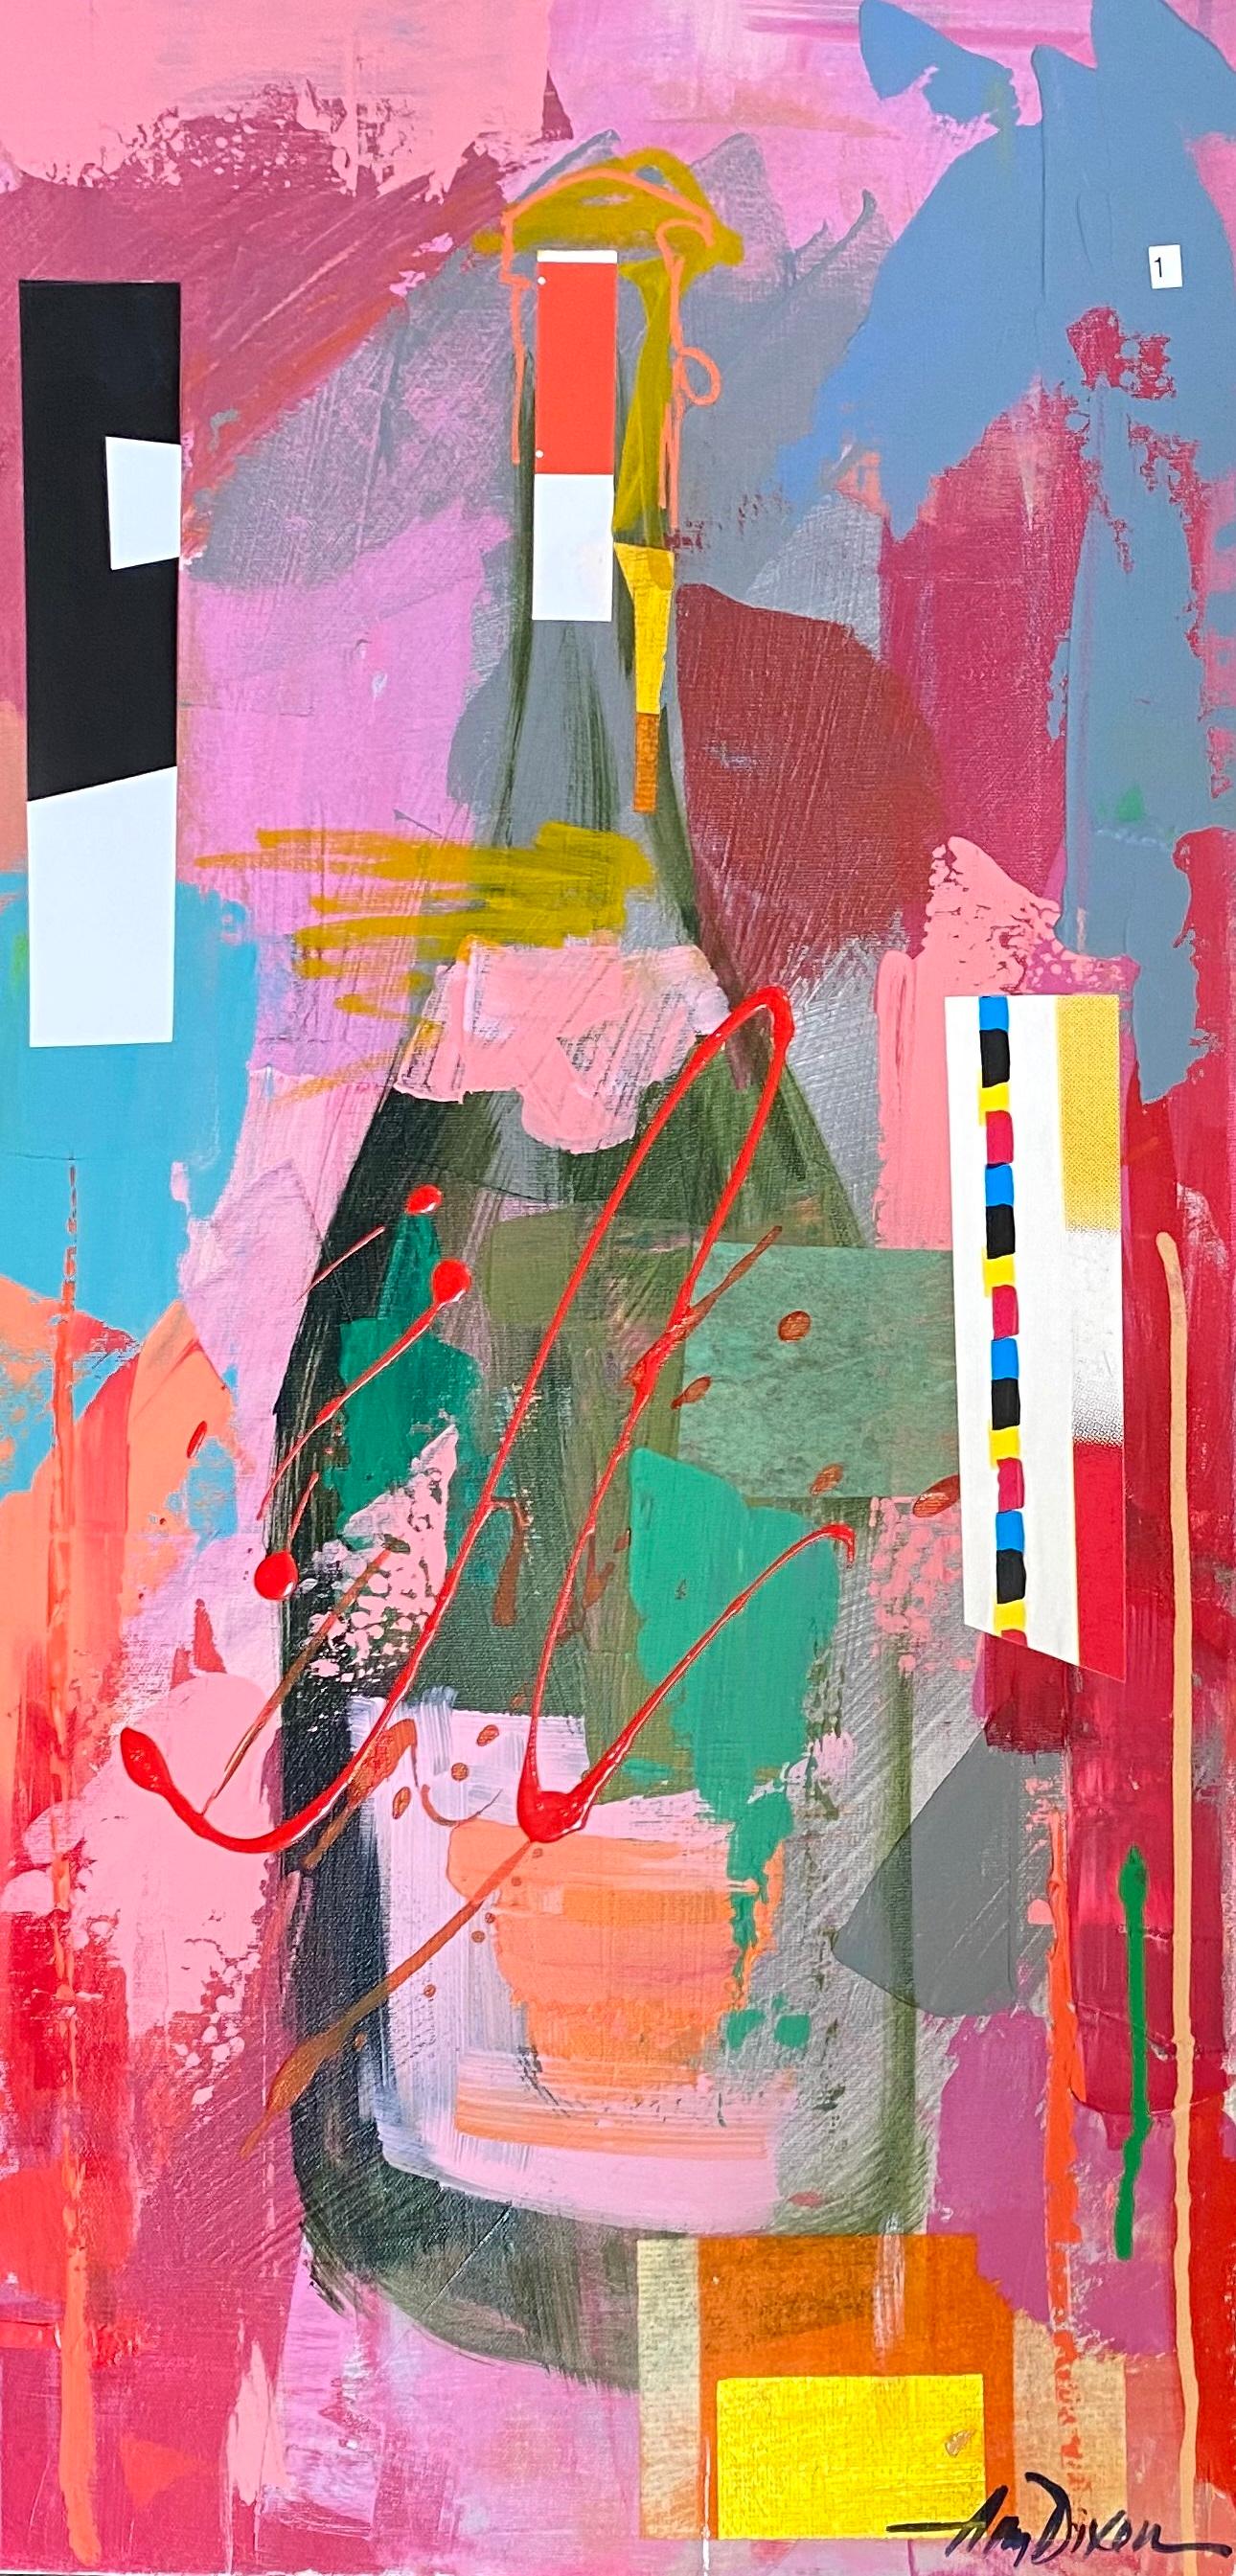 'Veuve Pink Dance Art Collage' is a large abstracted acrylic on canvas painting of square format, created by American artist Amy Dixon in 2021. Featuring a vibrant palette made of a variety of colors such as purple, green, turquoise, red, pink and